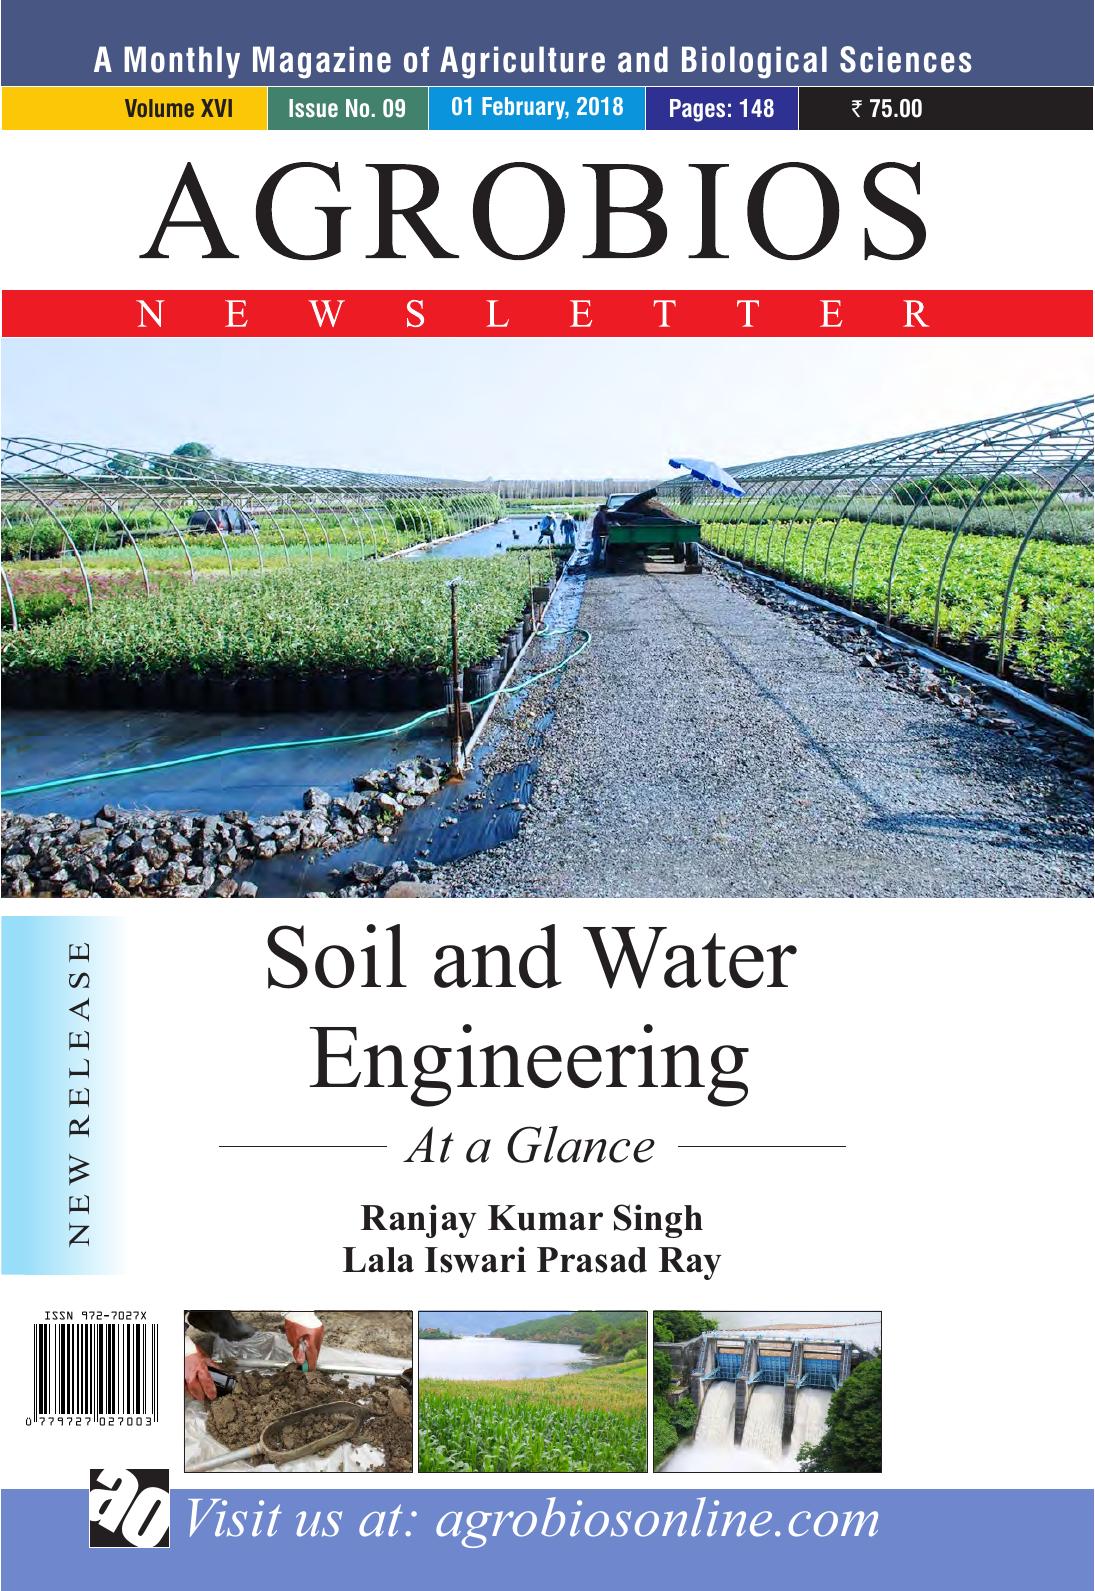 Soil and Water Engineering ( PDFDrive.com ) 2